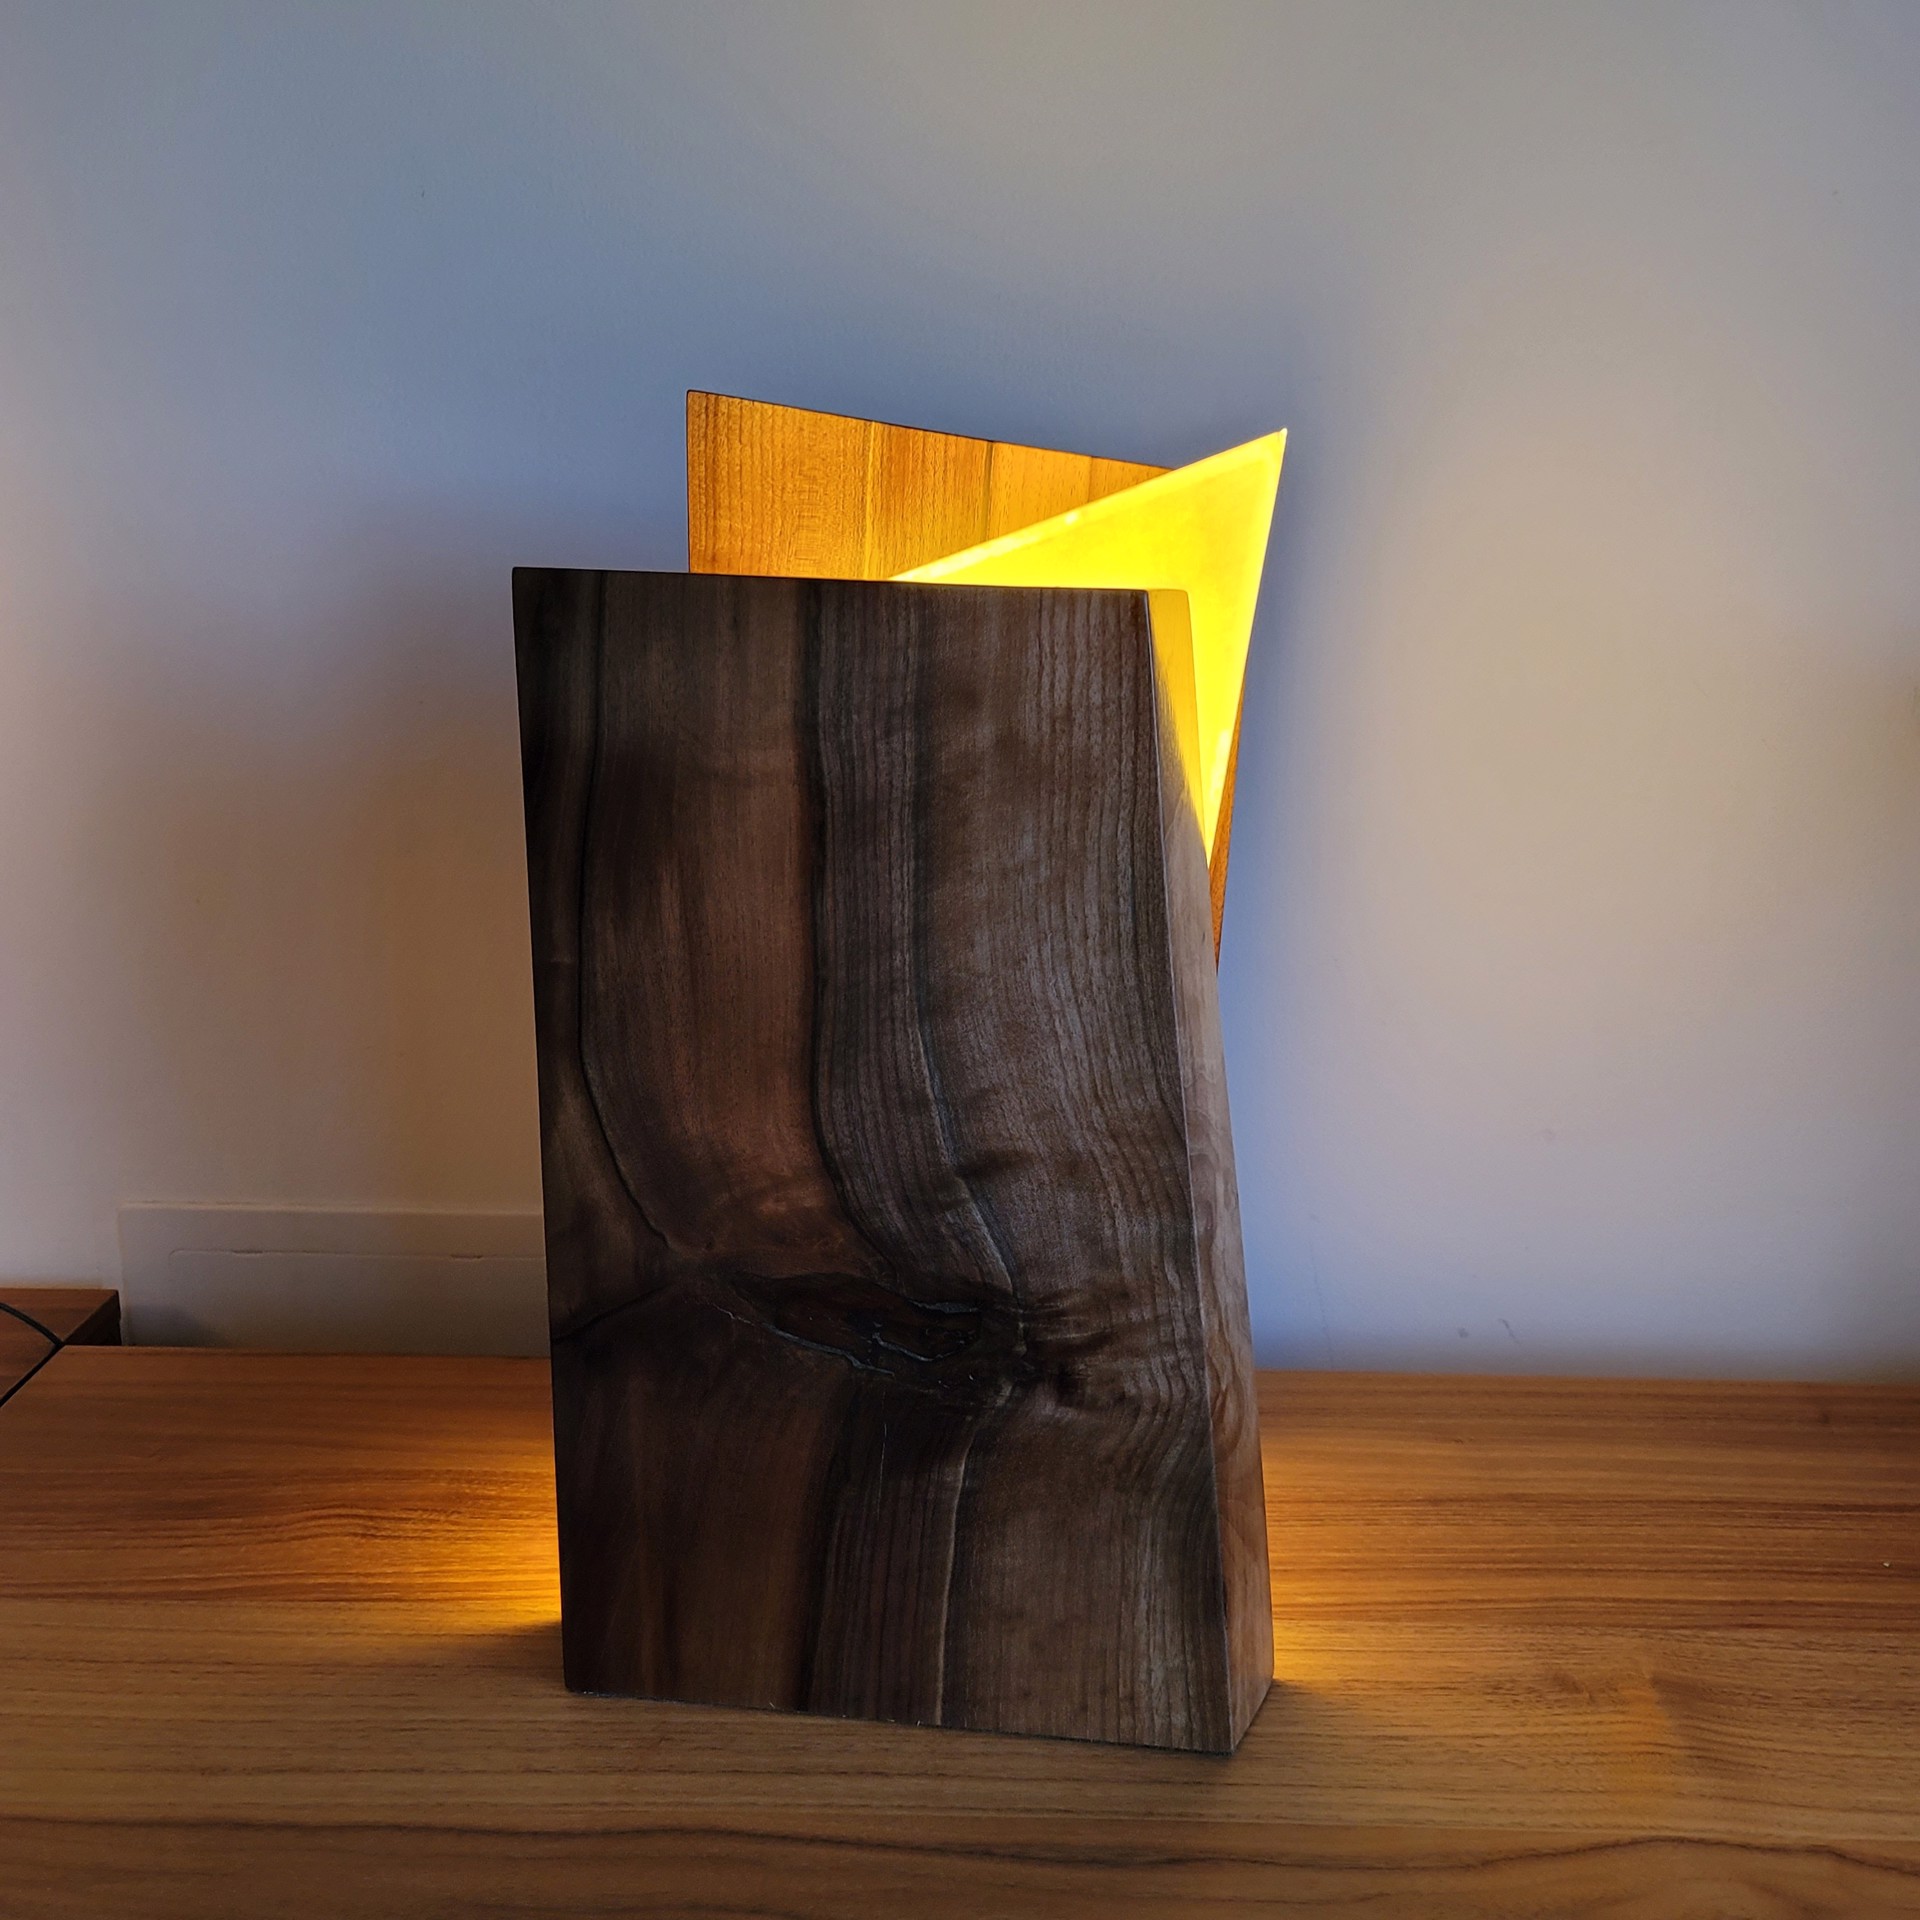 Summit Lamp by James Violette